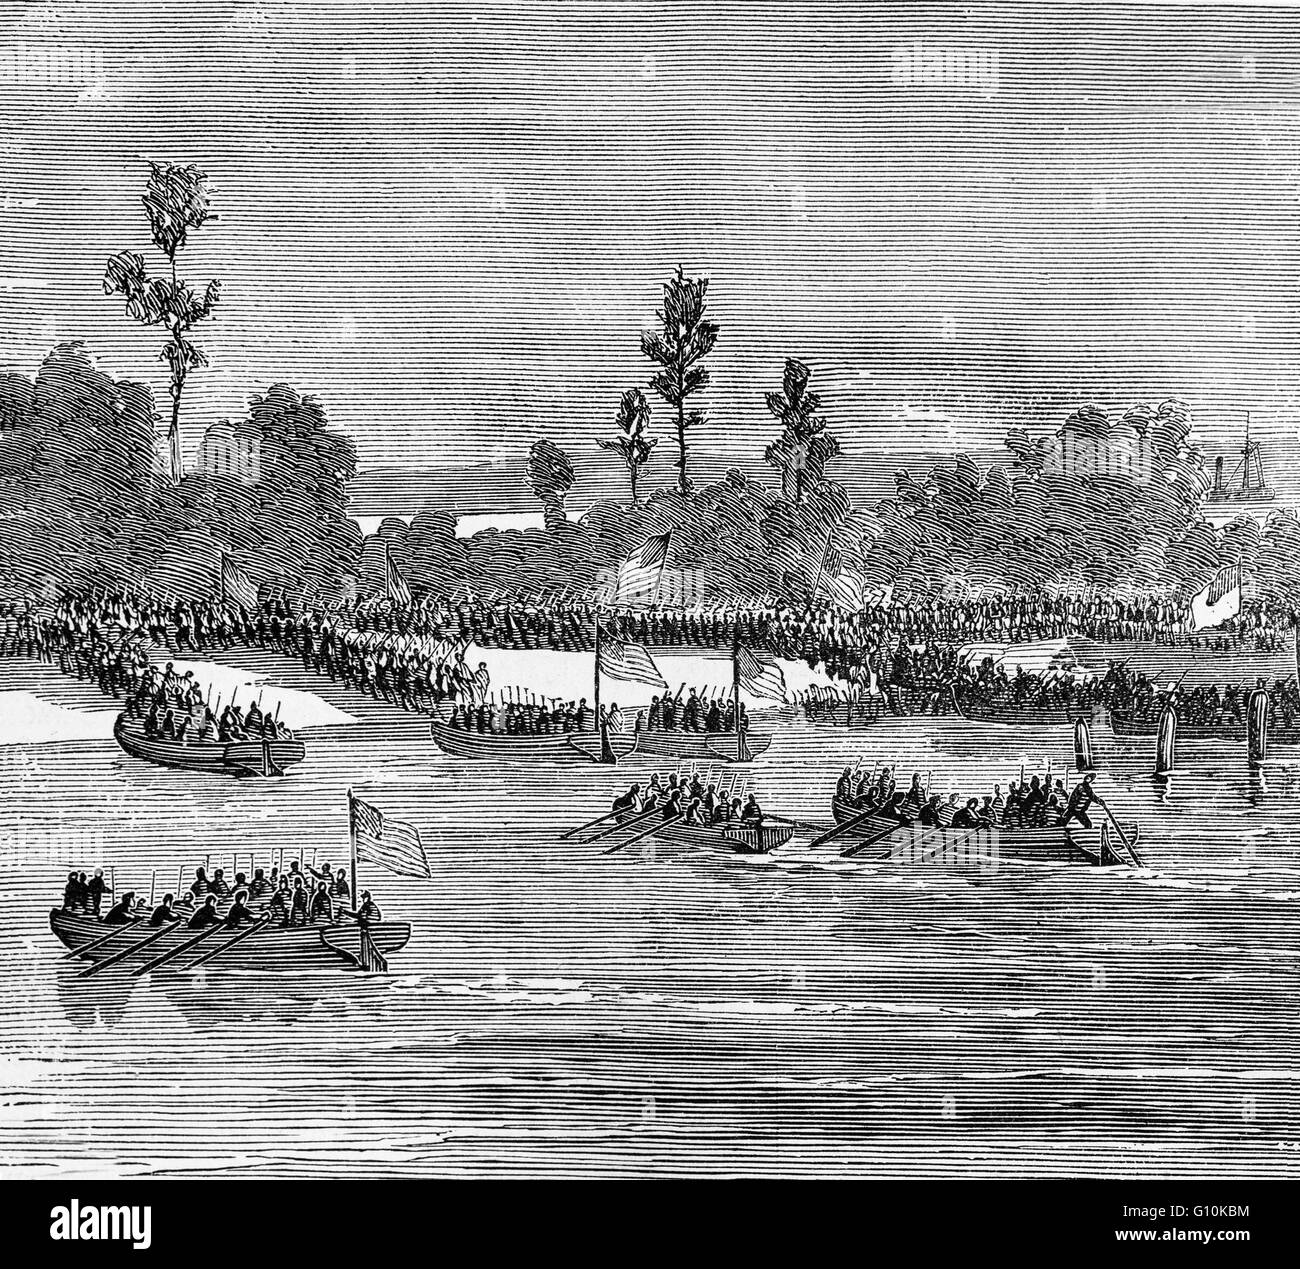 Known as Burnside's Landings in the Hatteras Inlet, January 1862.N During the Battle of New Bern, Gen. Ambrose E. Burnside led 15,000 U.S. Army troops while Flag Officer Louis M. Goldsborough commanded the naval contingent to attack Confederates in North Carolina. Stock Photo